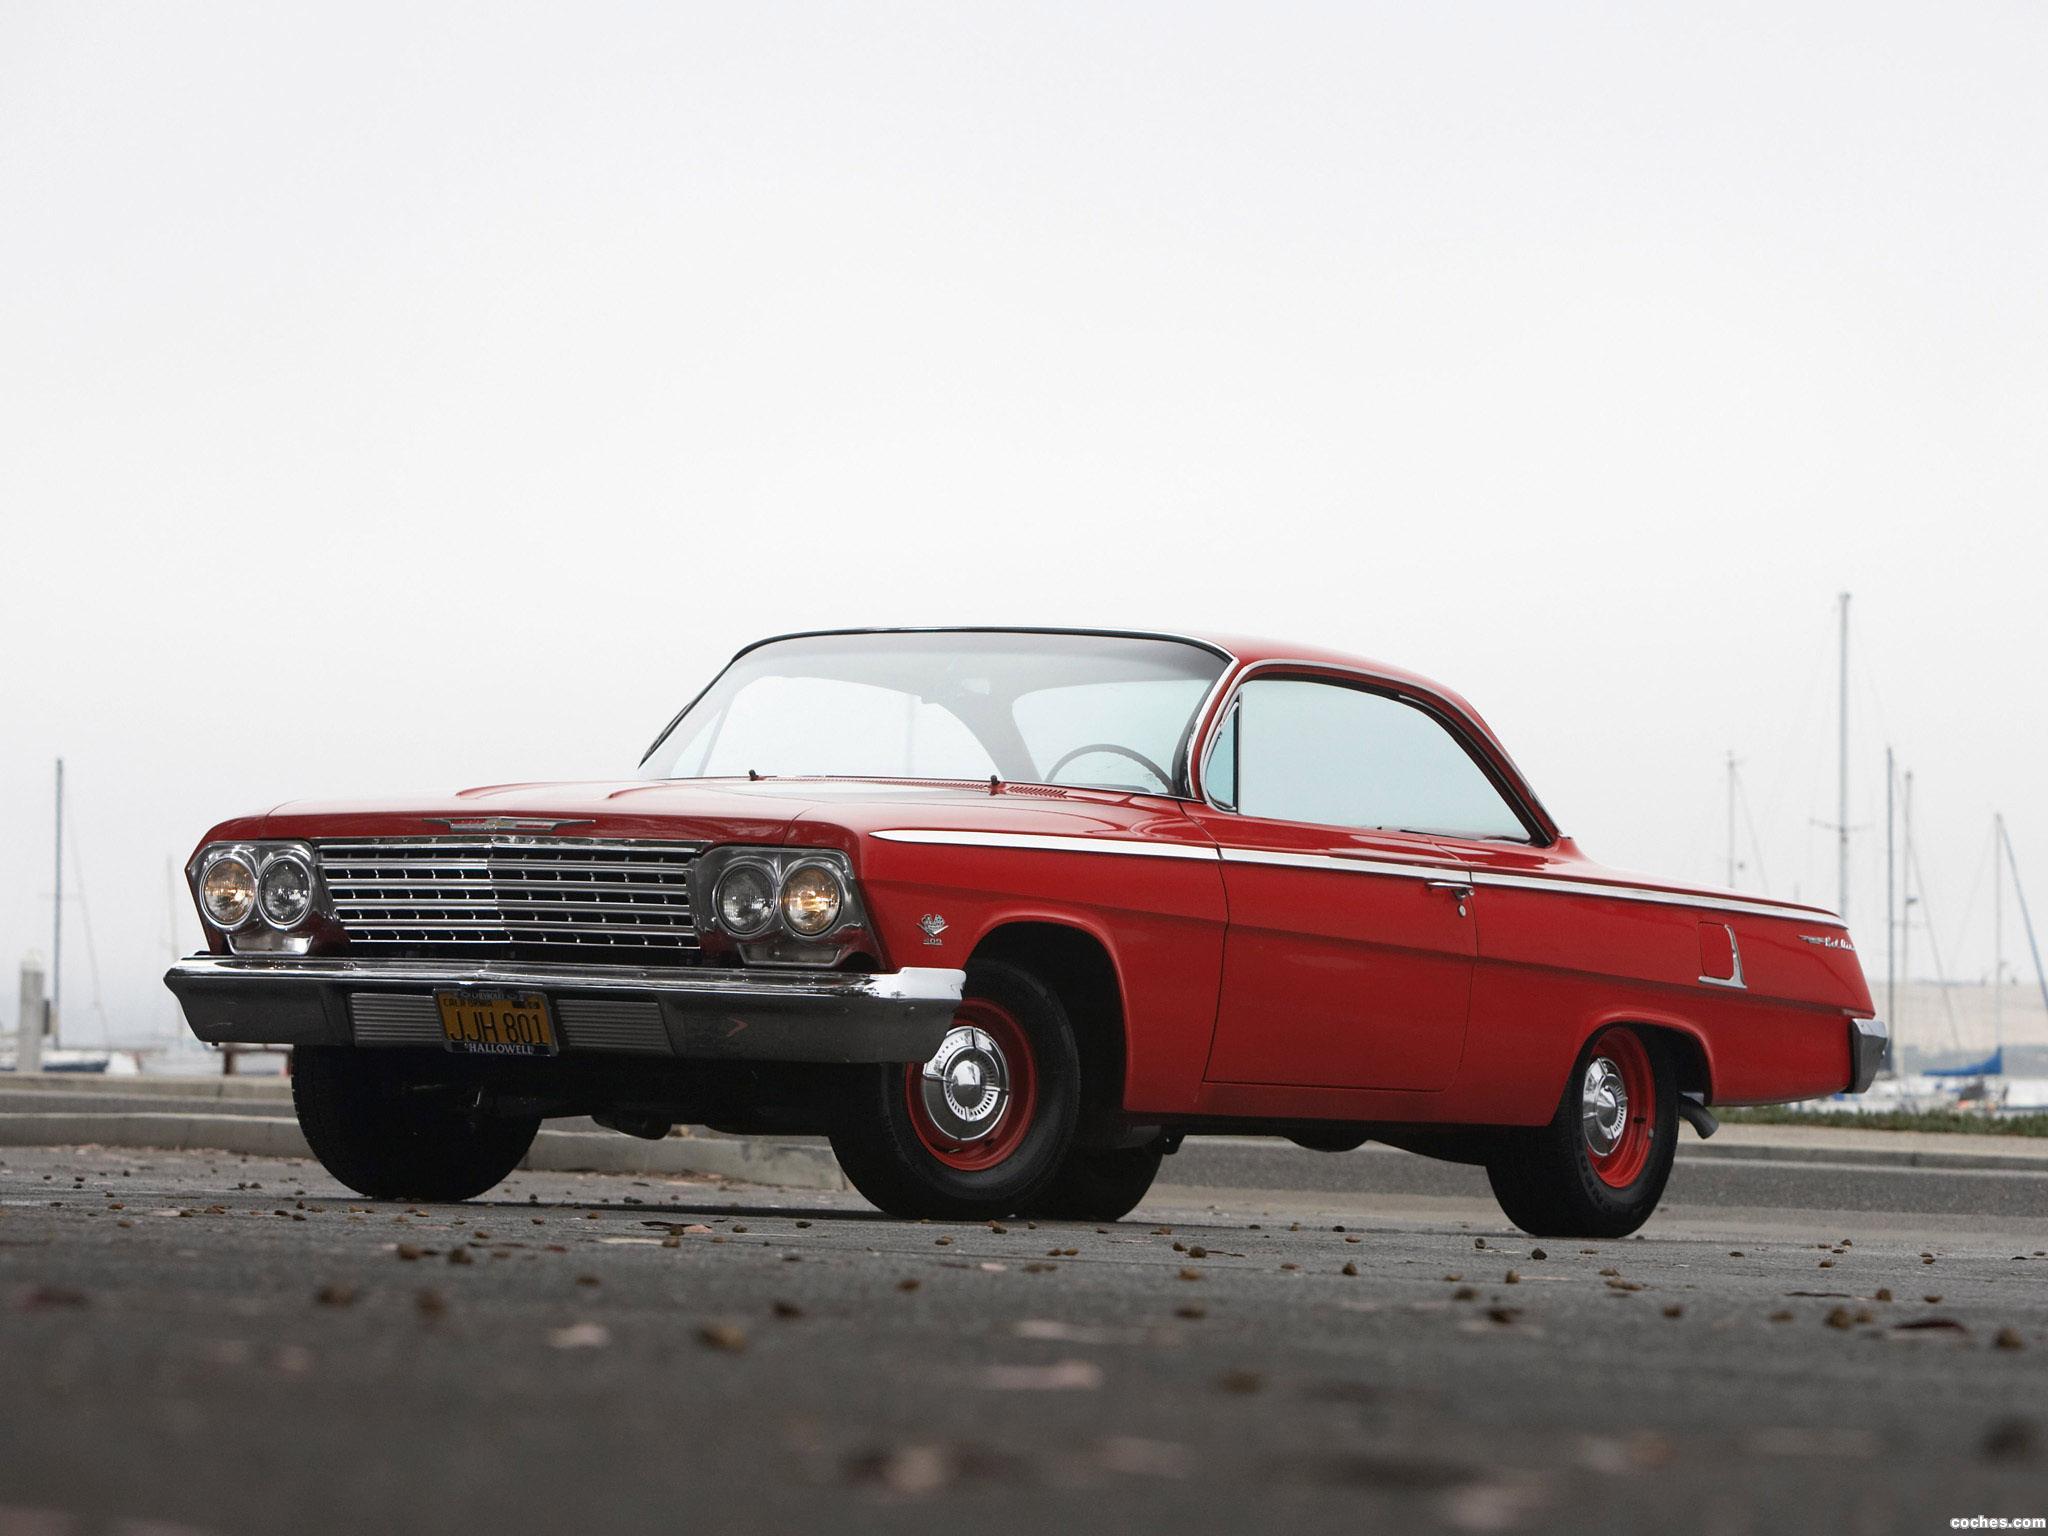 chevrolet_bel-air-409-sport-coupe-1962_r5